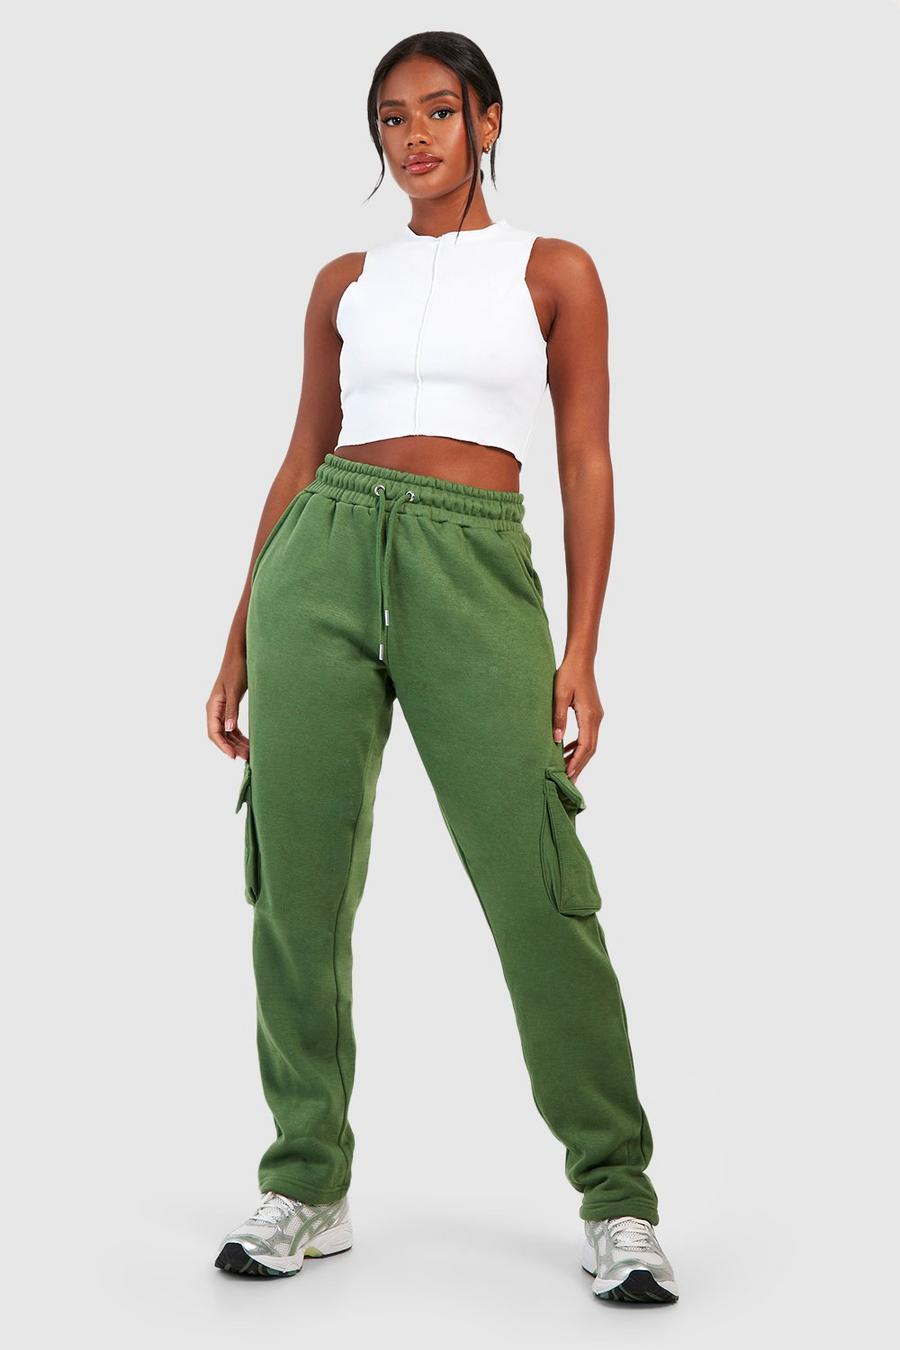 High Waist Womens Cargo Pants With Drawstring And Thick Fleece Fleece Leggings  Women Casual, Loose Fit Joggers For Active Autumn Sweatpants From  Fourforme, $16.47